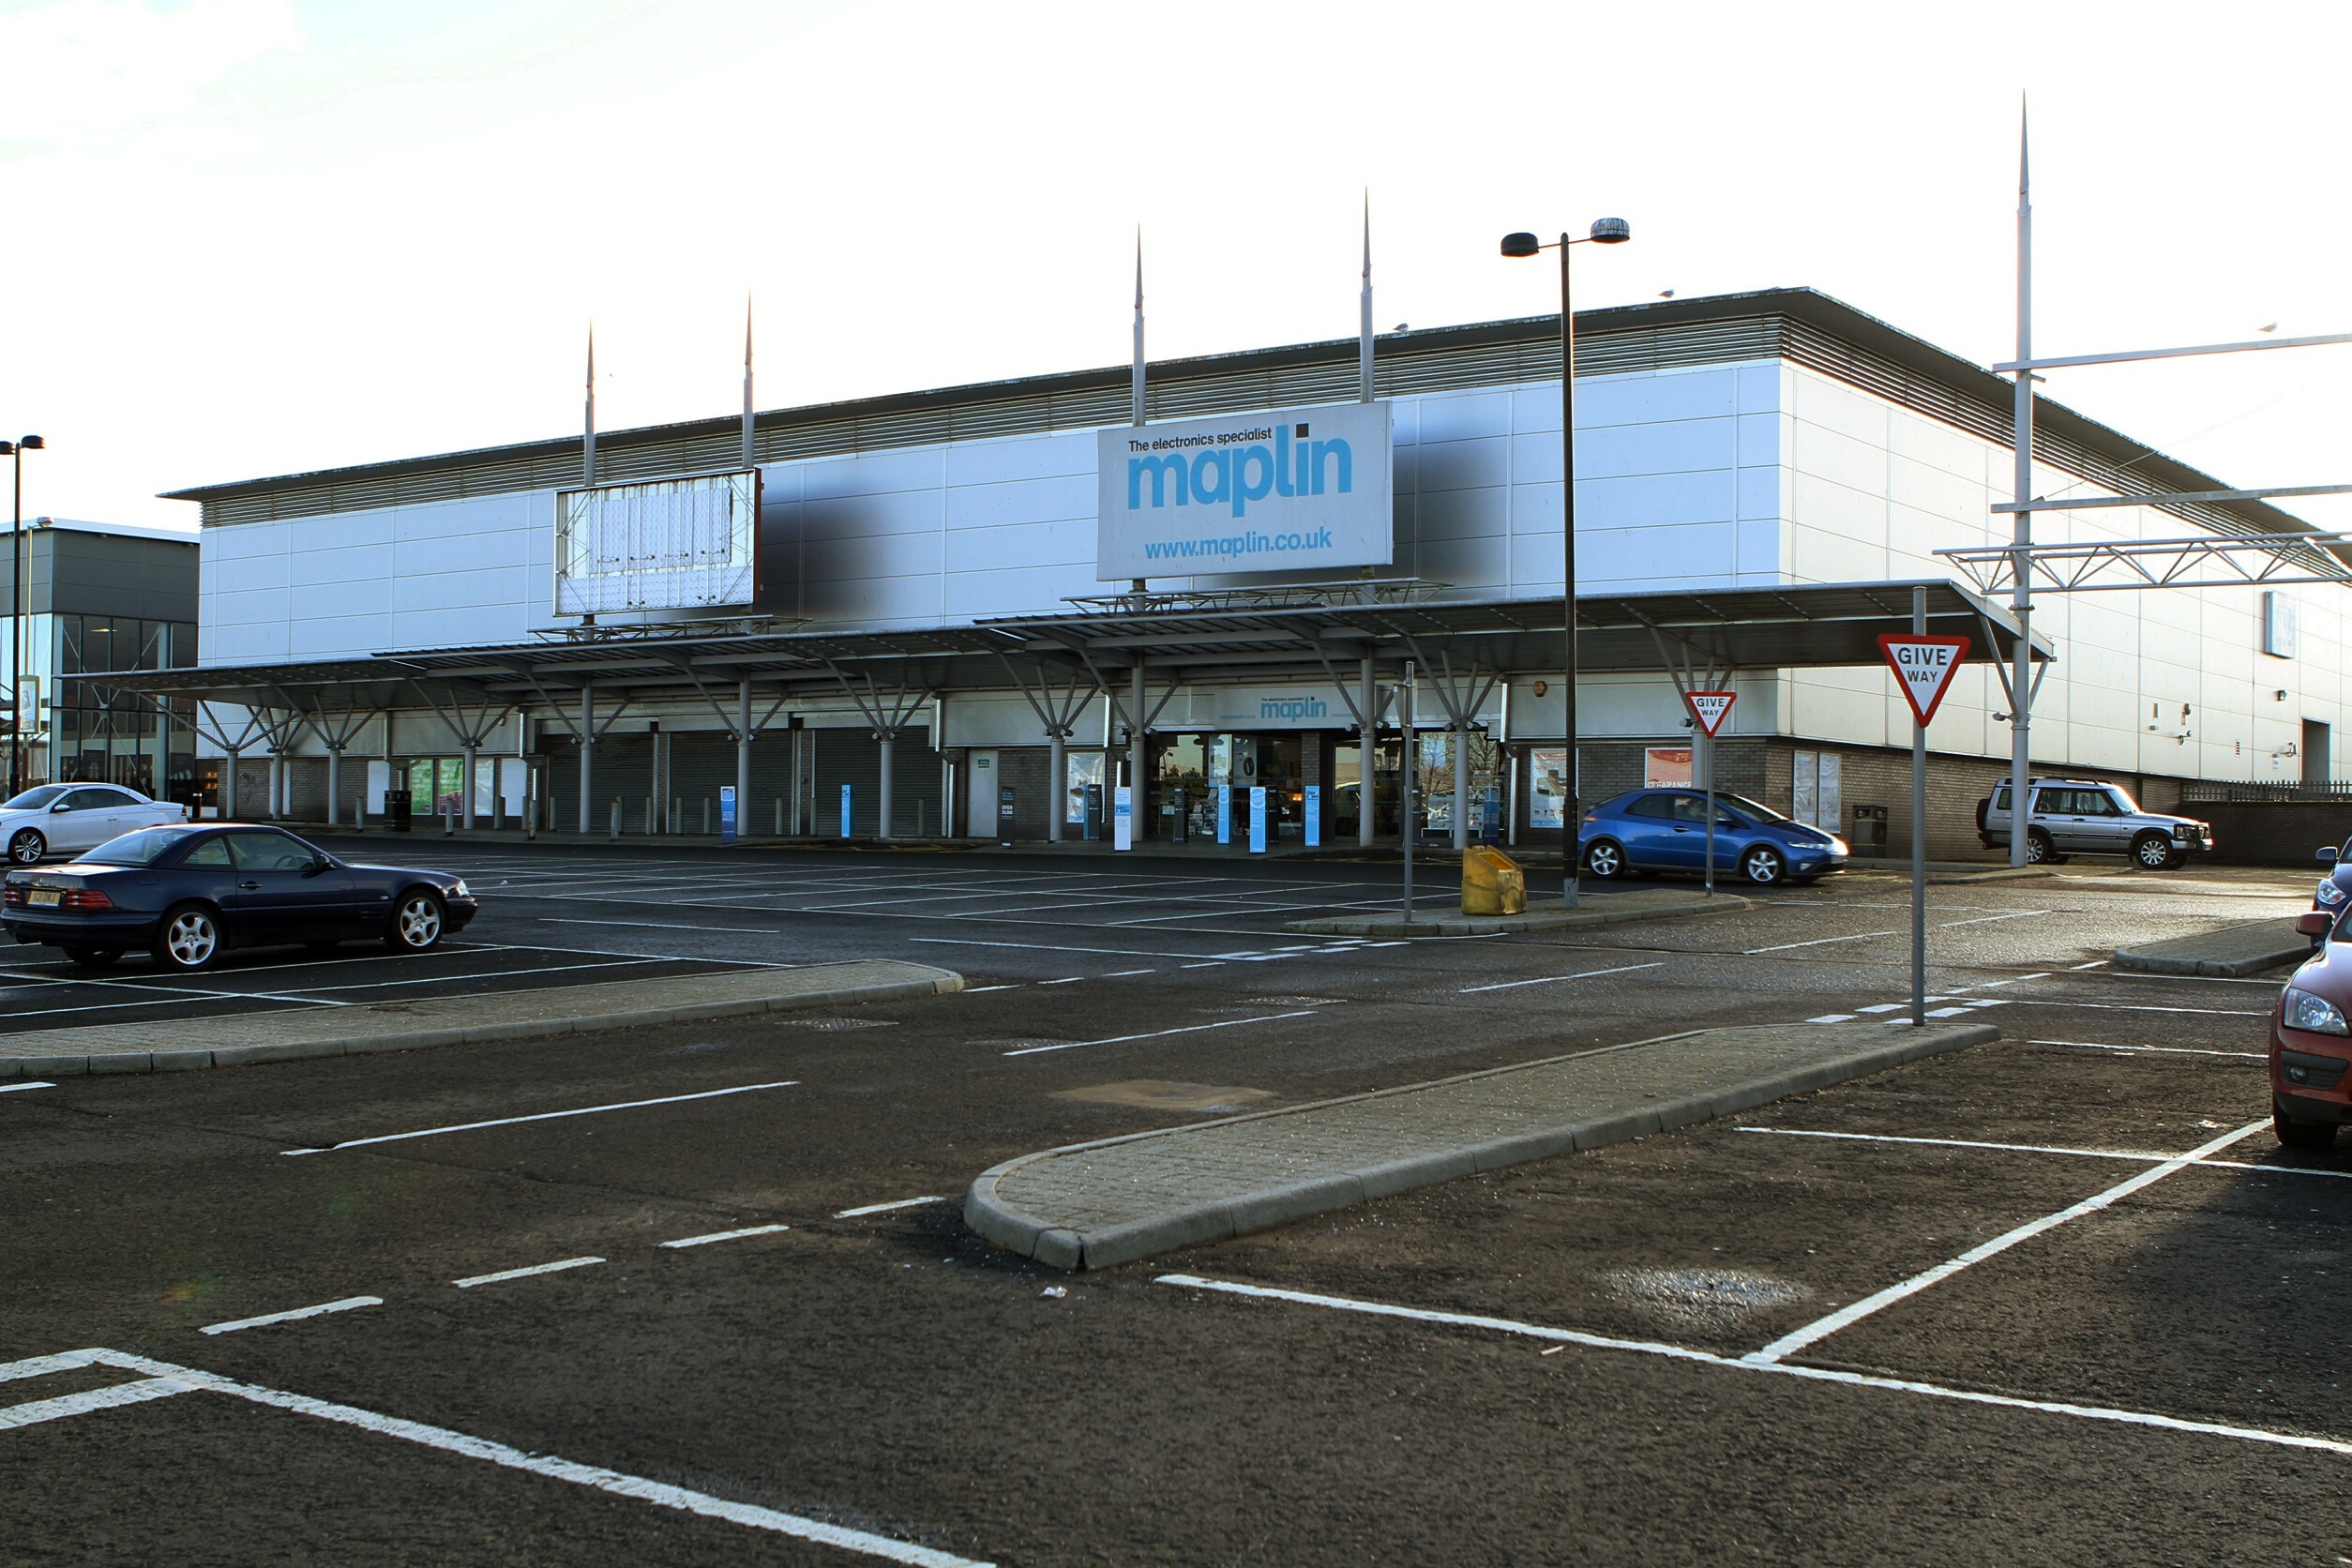 The assault is said to have taken place outside Maplin in the Kingsway West retail park.